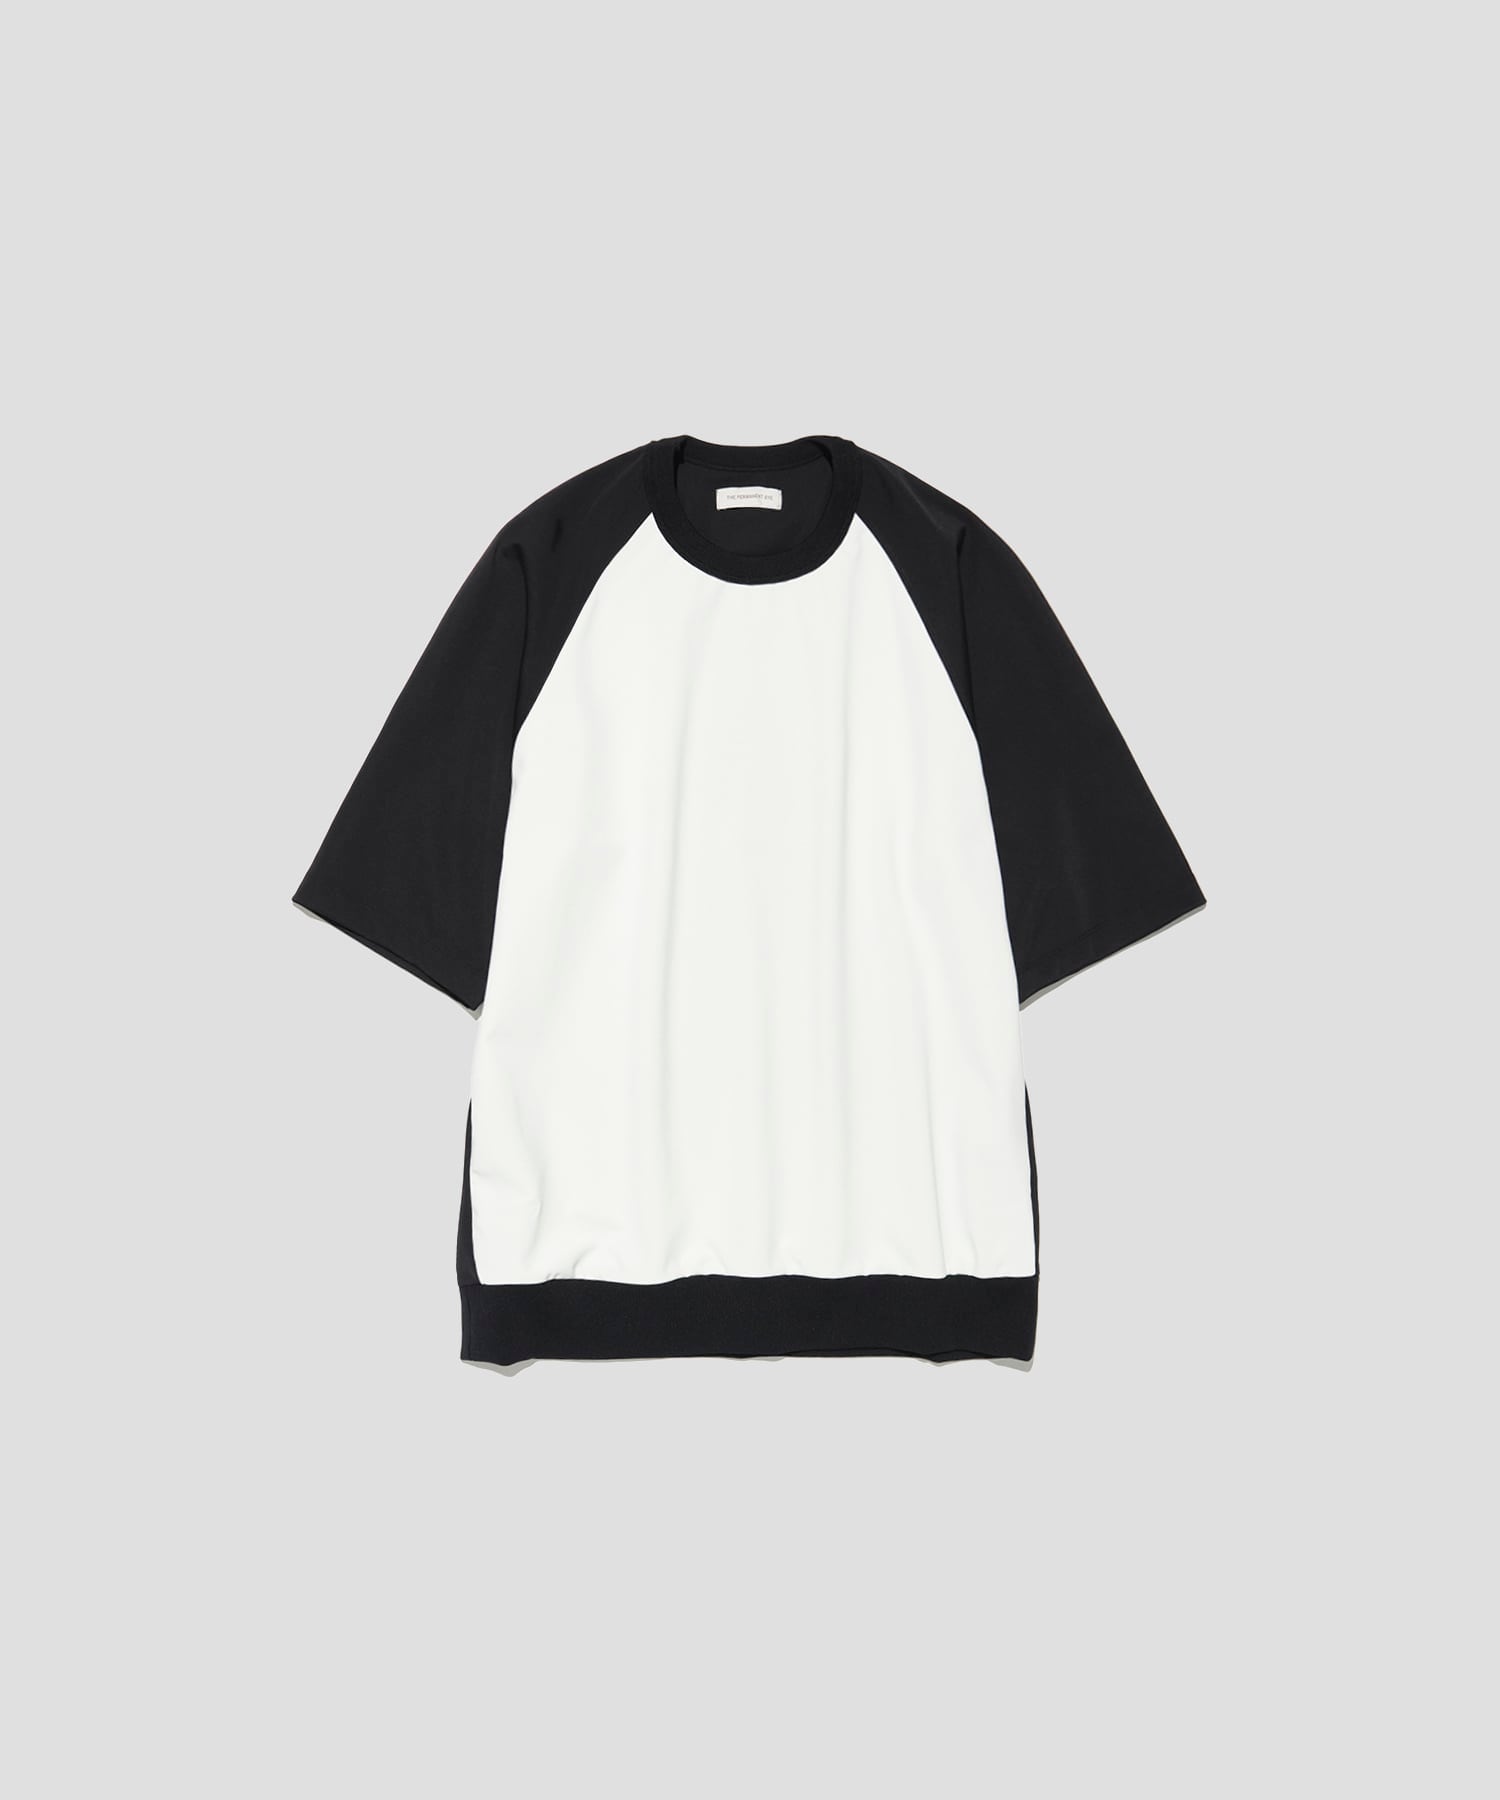 Washable High Function Jersey Raglan S/S Tops